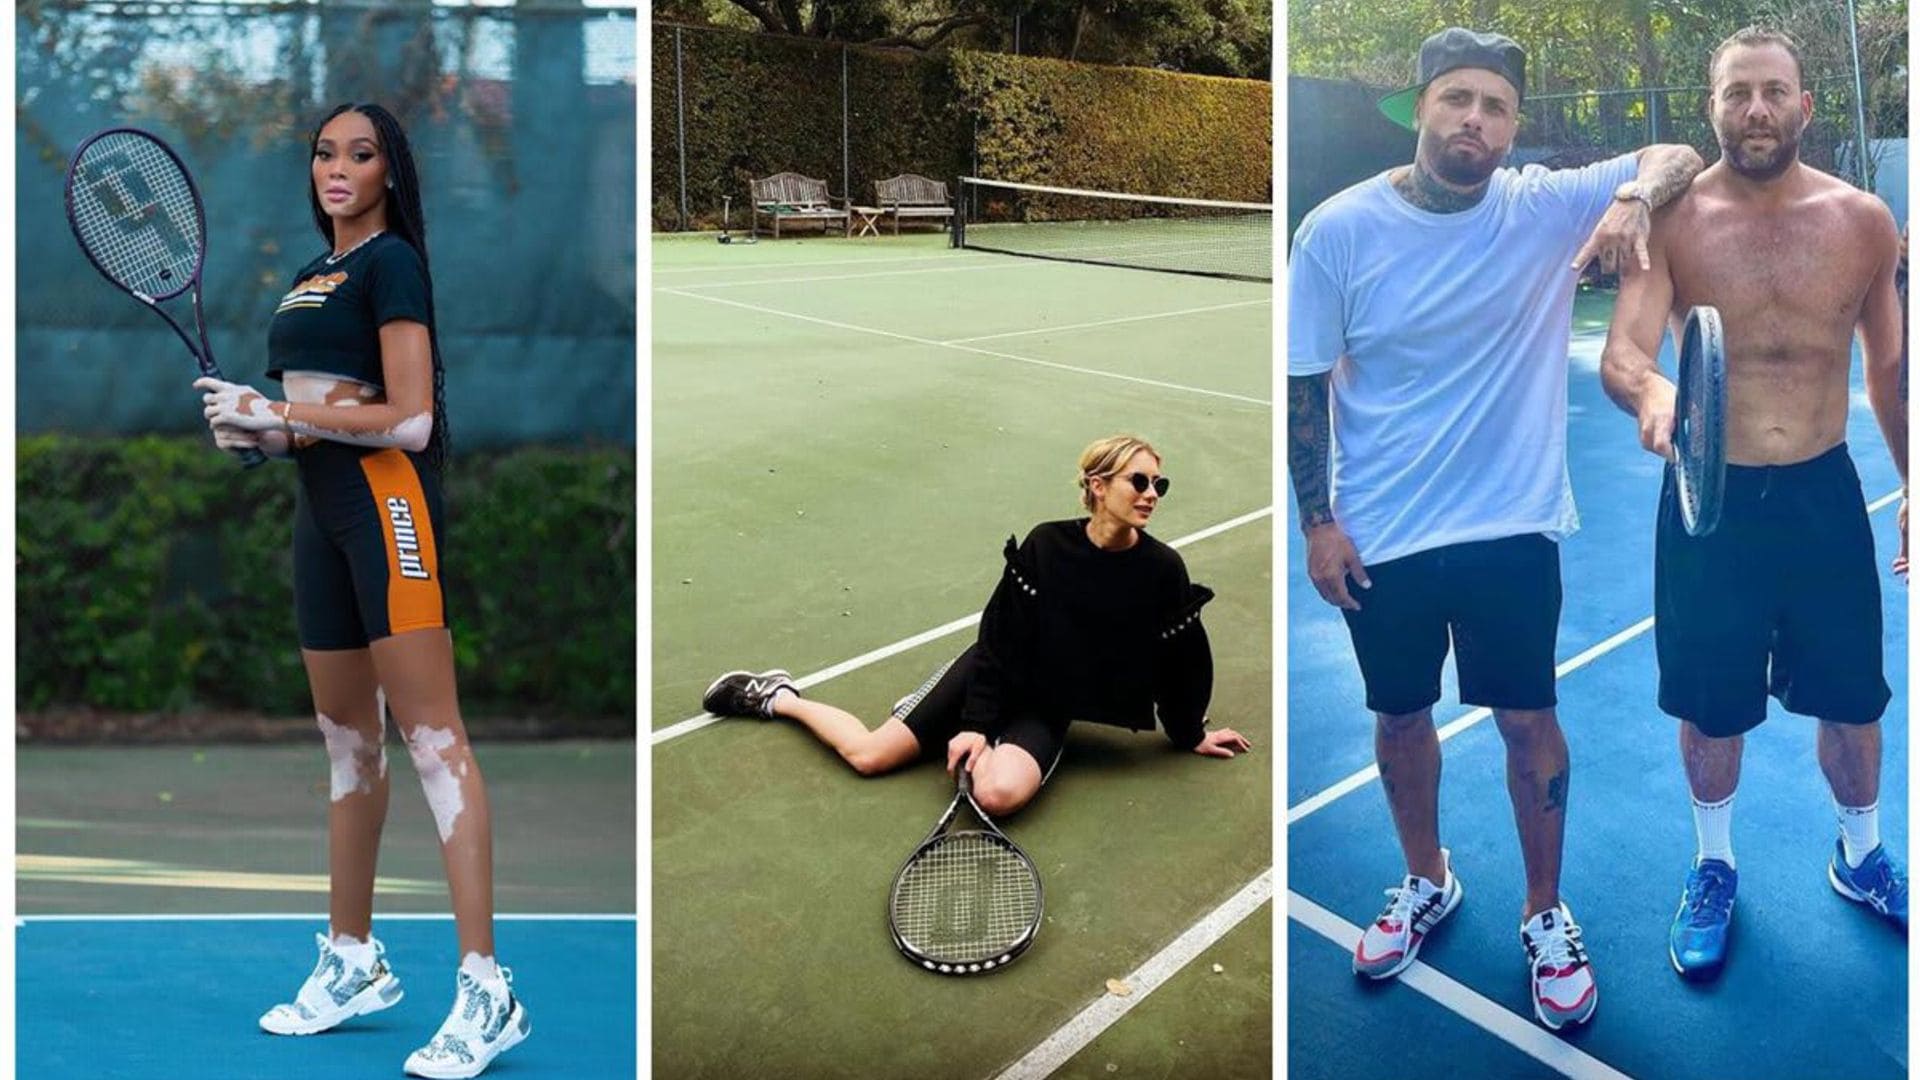 Tennis Is the New Hobby! Nicky Jam, Jamie Foxx, and More Celebs Hitting the Court